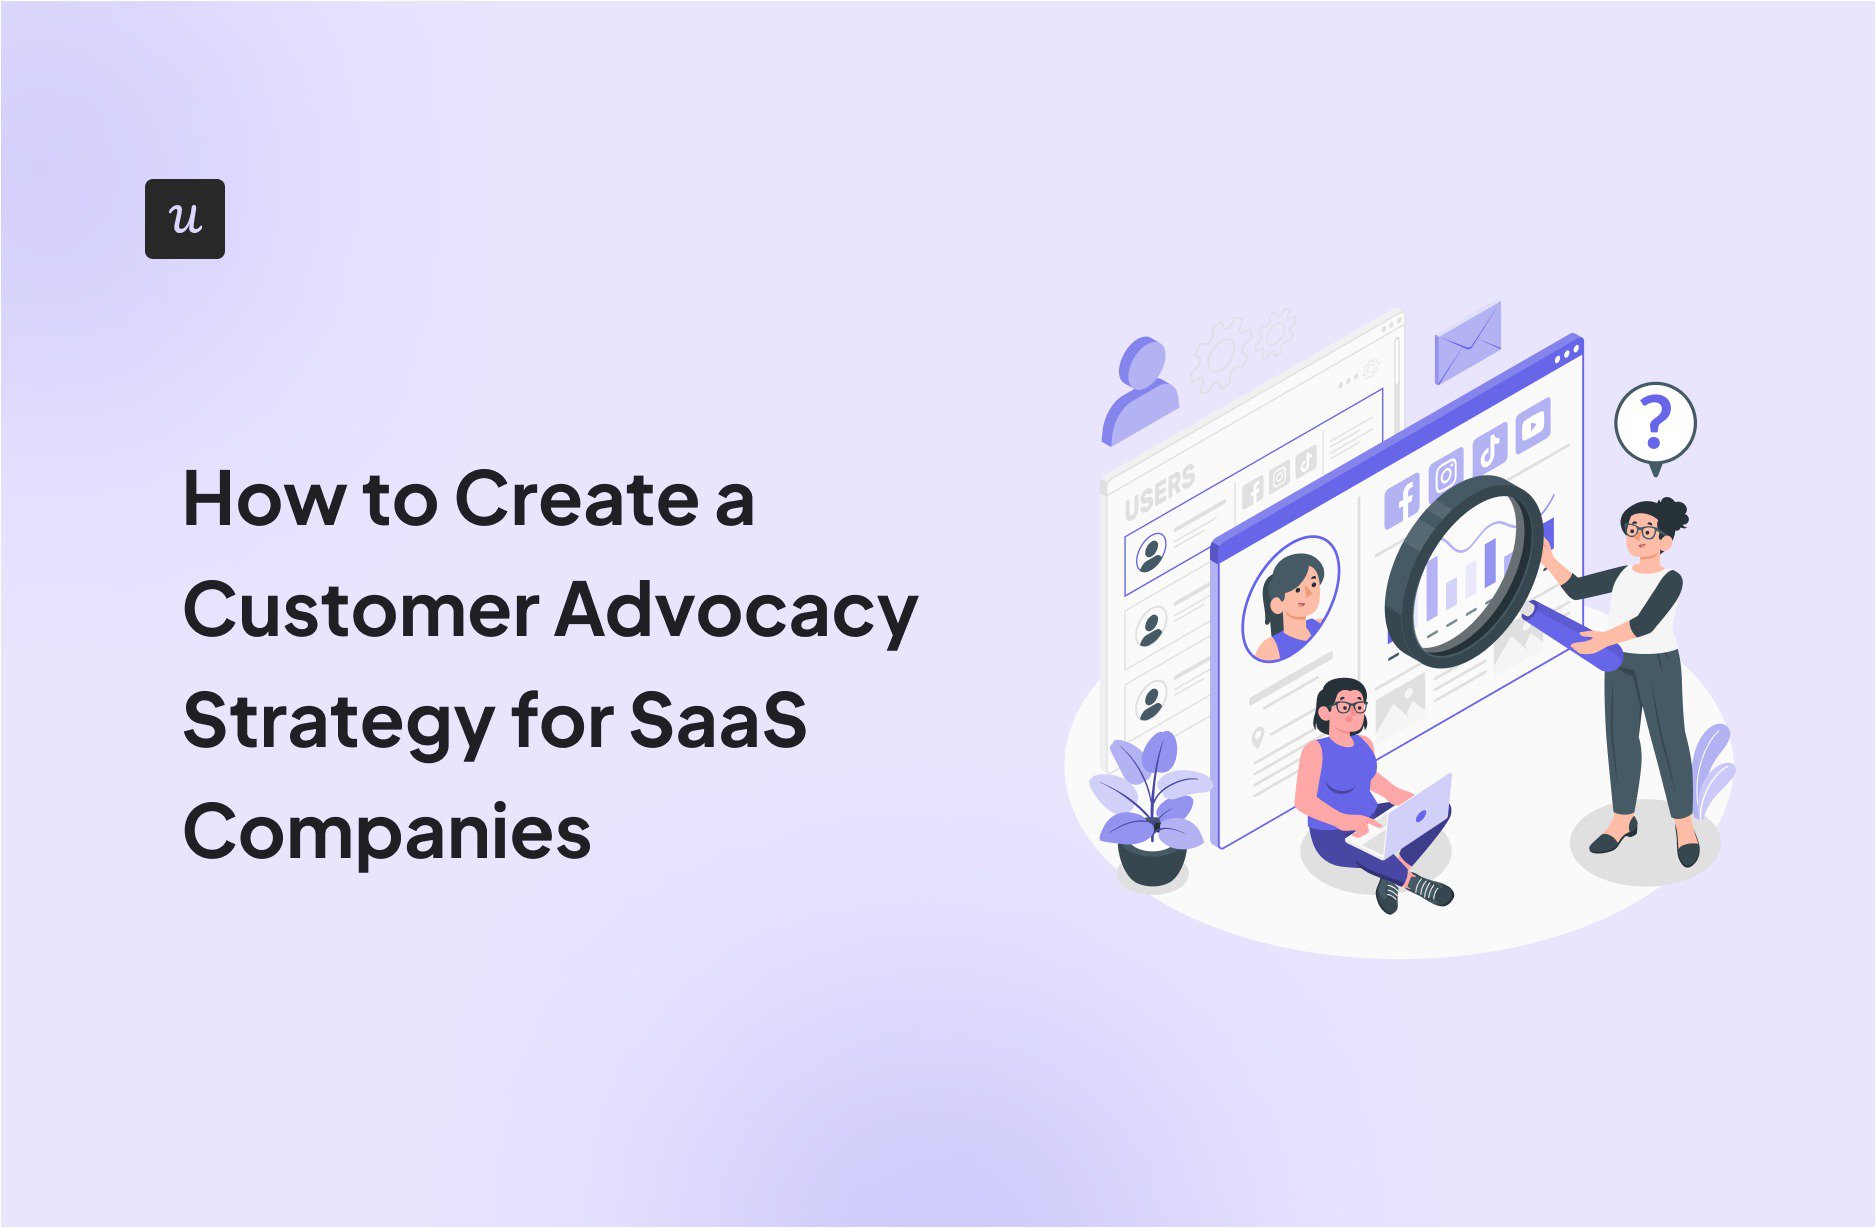 How to Create a Customer Advocacy Strategy for SaaS Companies cover